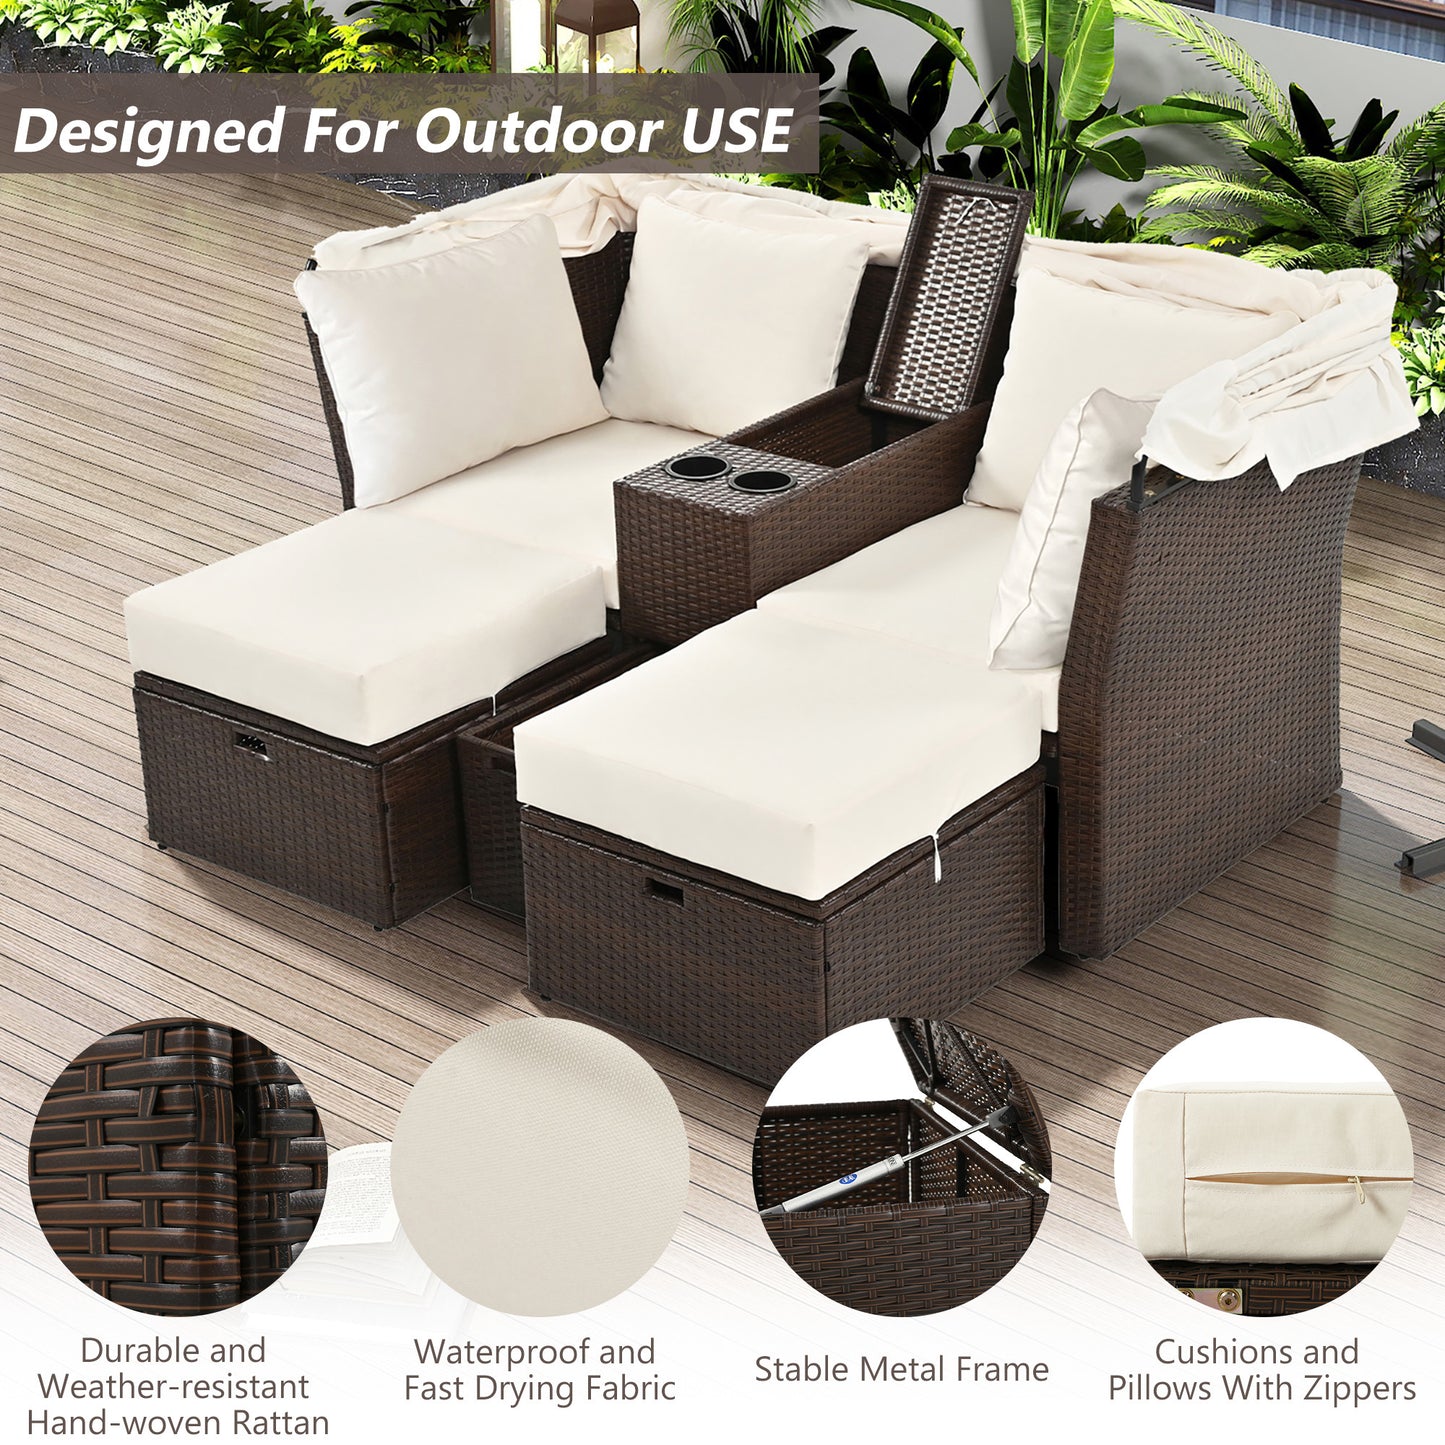 2-Seater Outdoor Patio Daybed Outdoor Double Daybed Outdoor Loveseat Sofa Set with Foldable Awning and Cushions for Garden, Balcony, Poolside